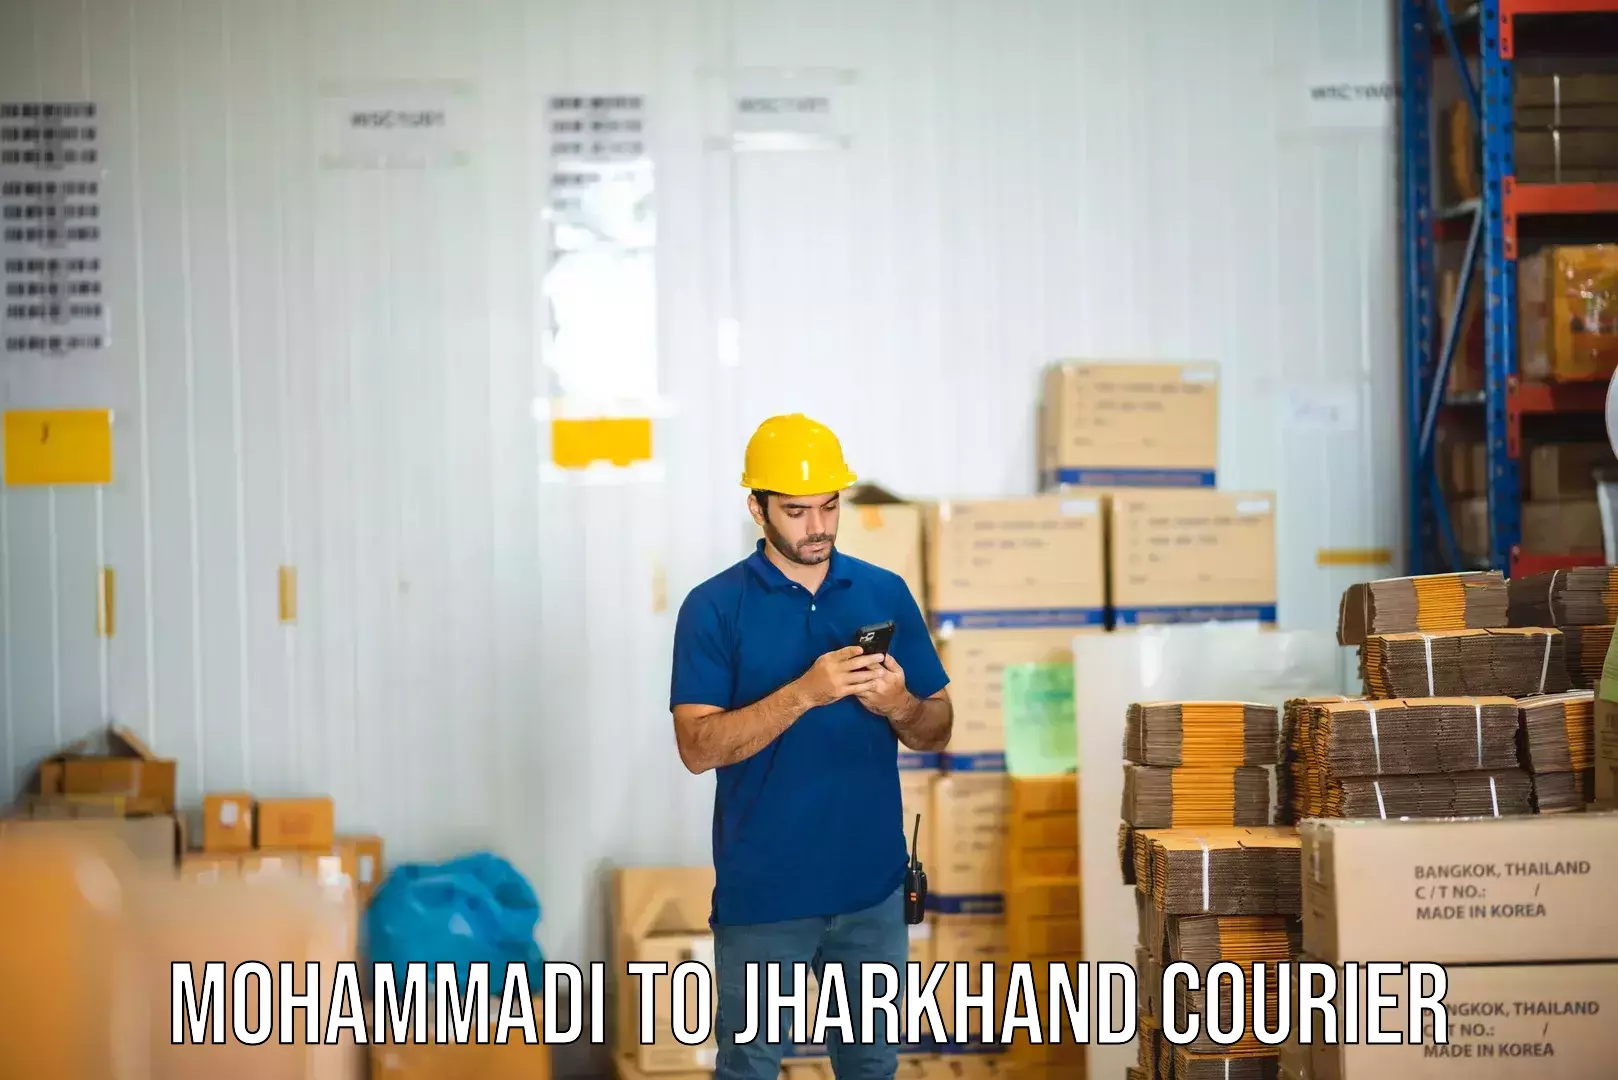 User-friendly delivery service Mohammadi to Jharkhand